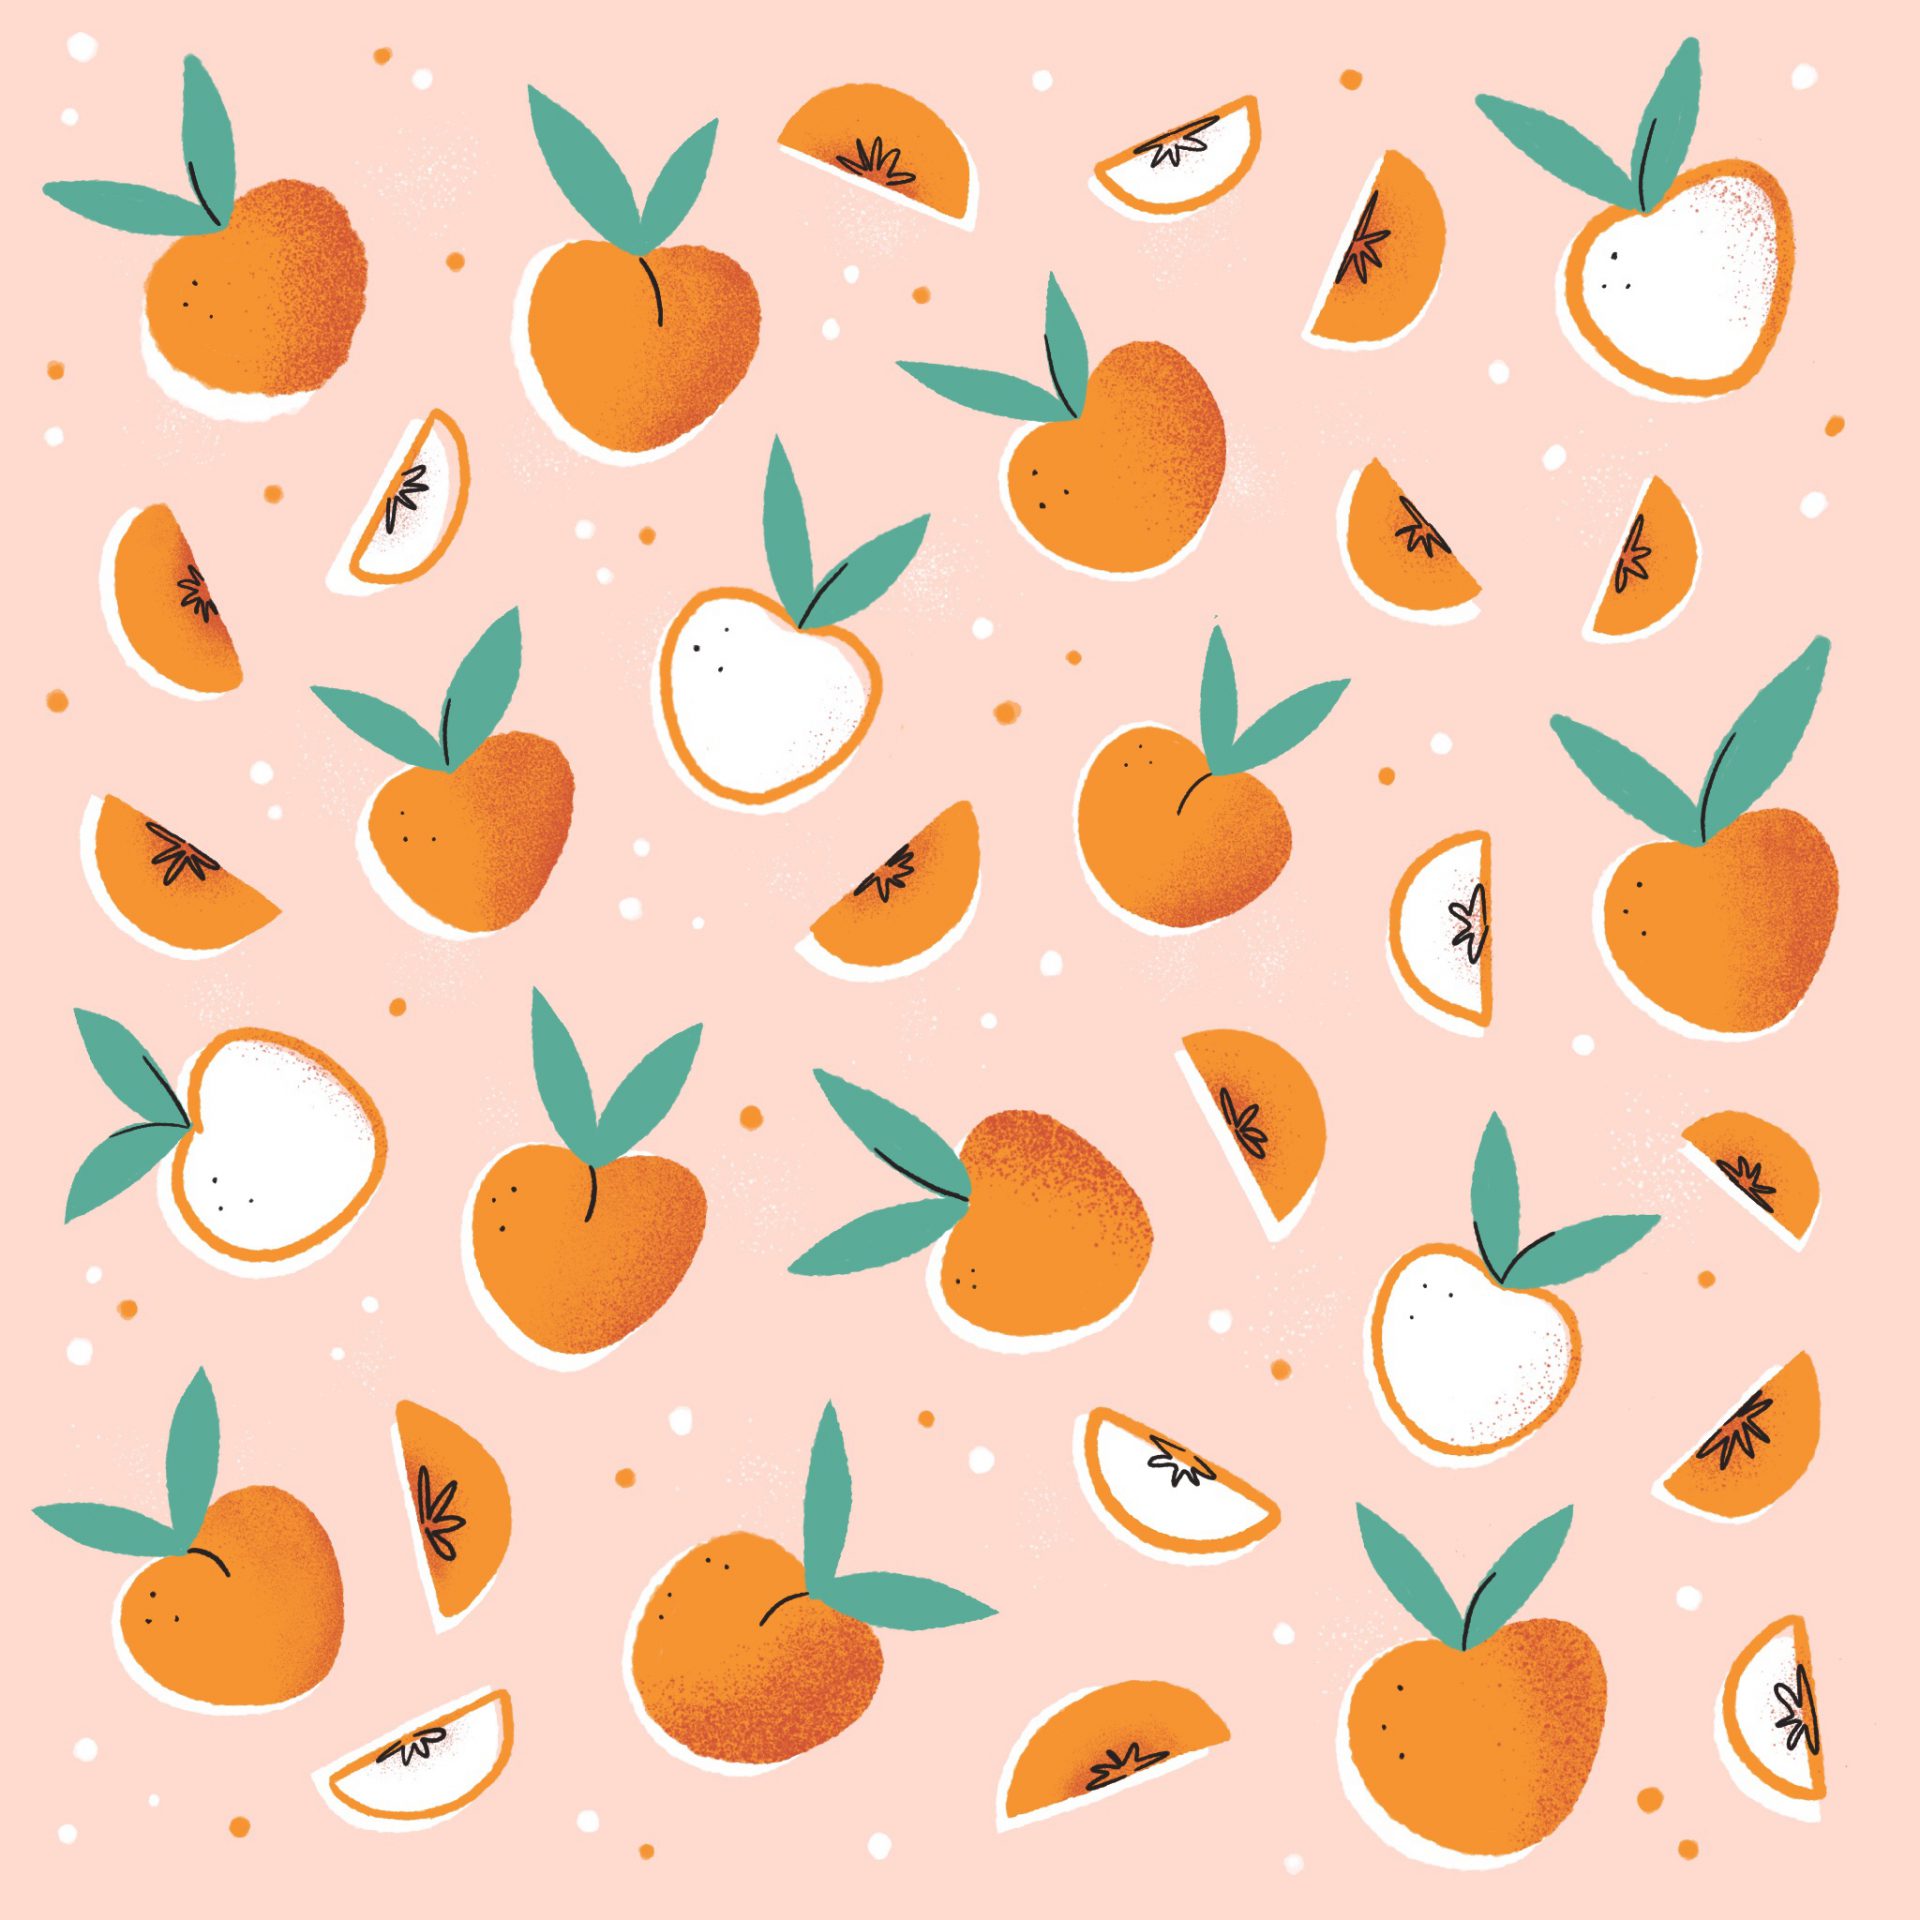 An illustrated pattern of peaches